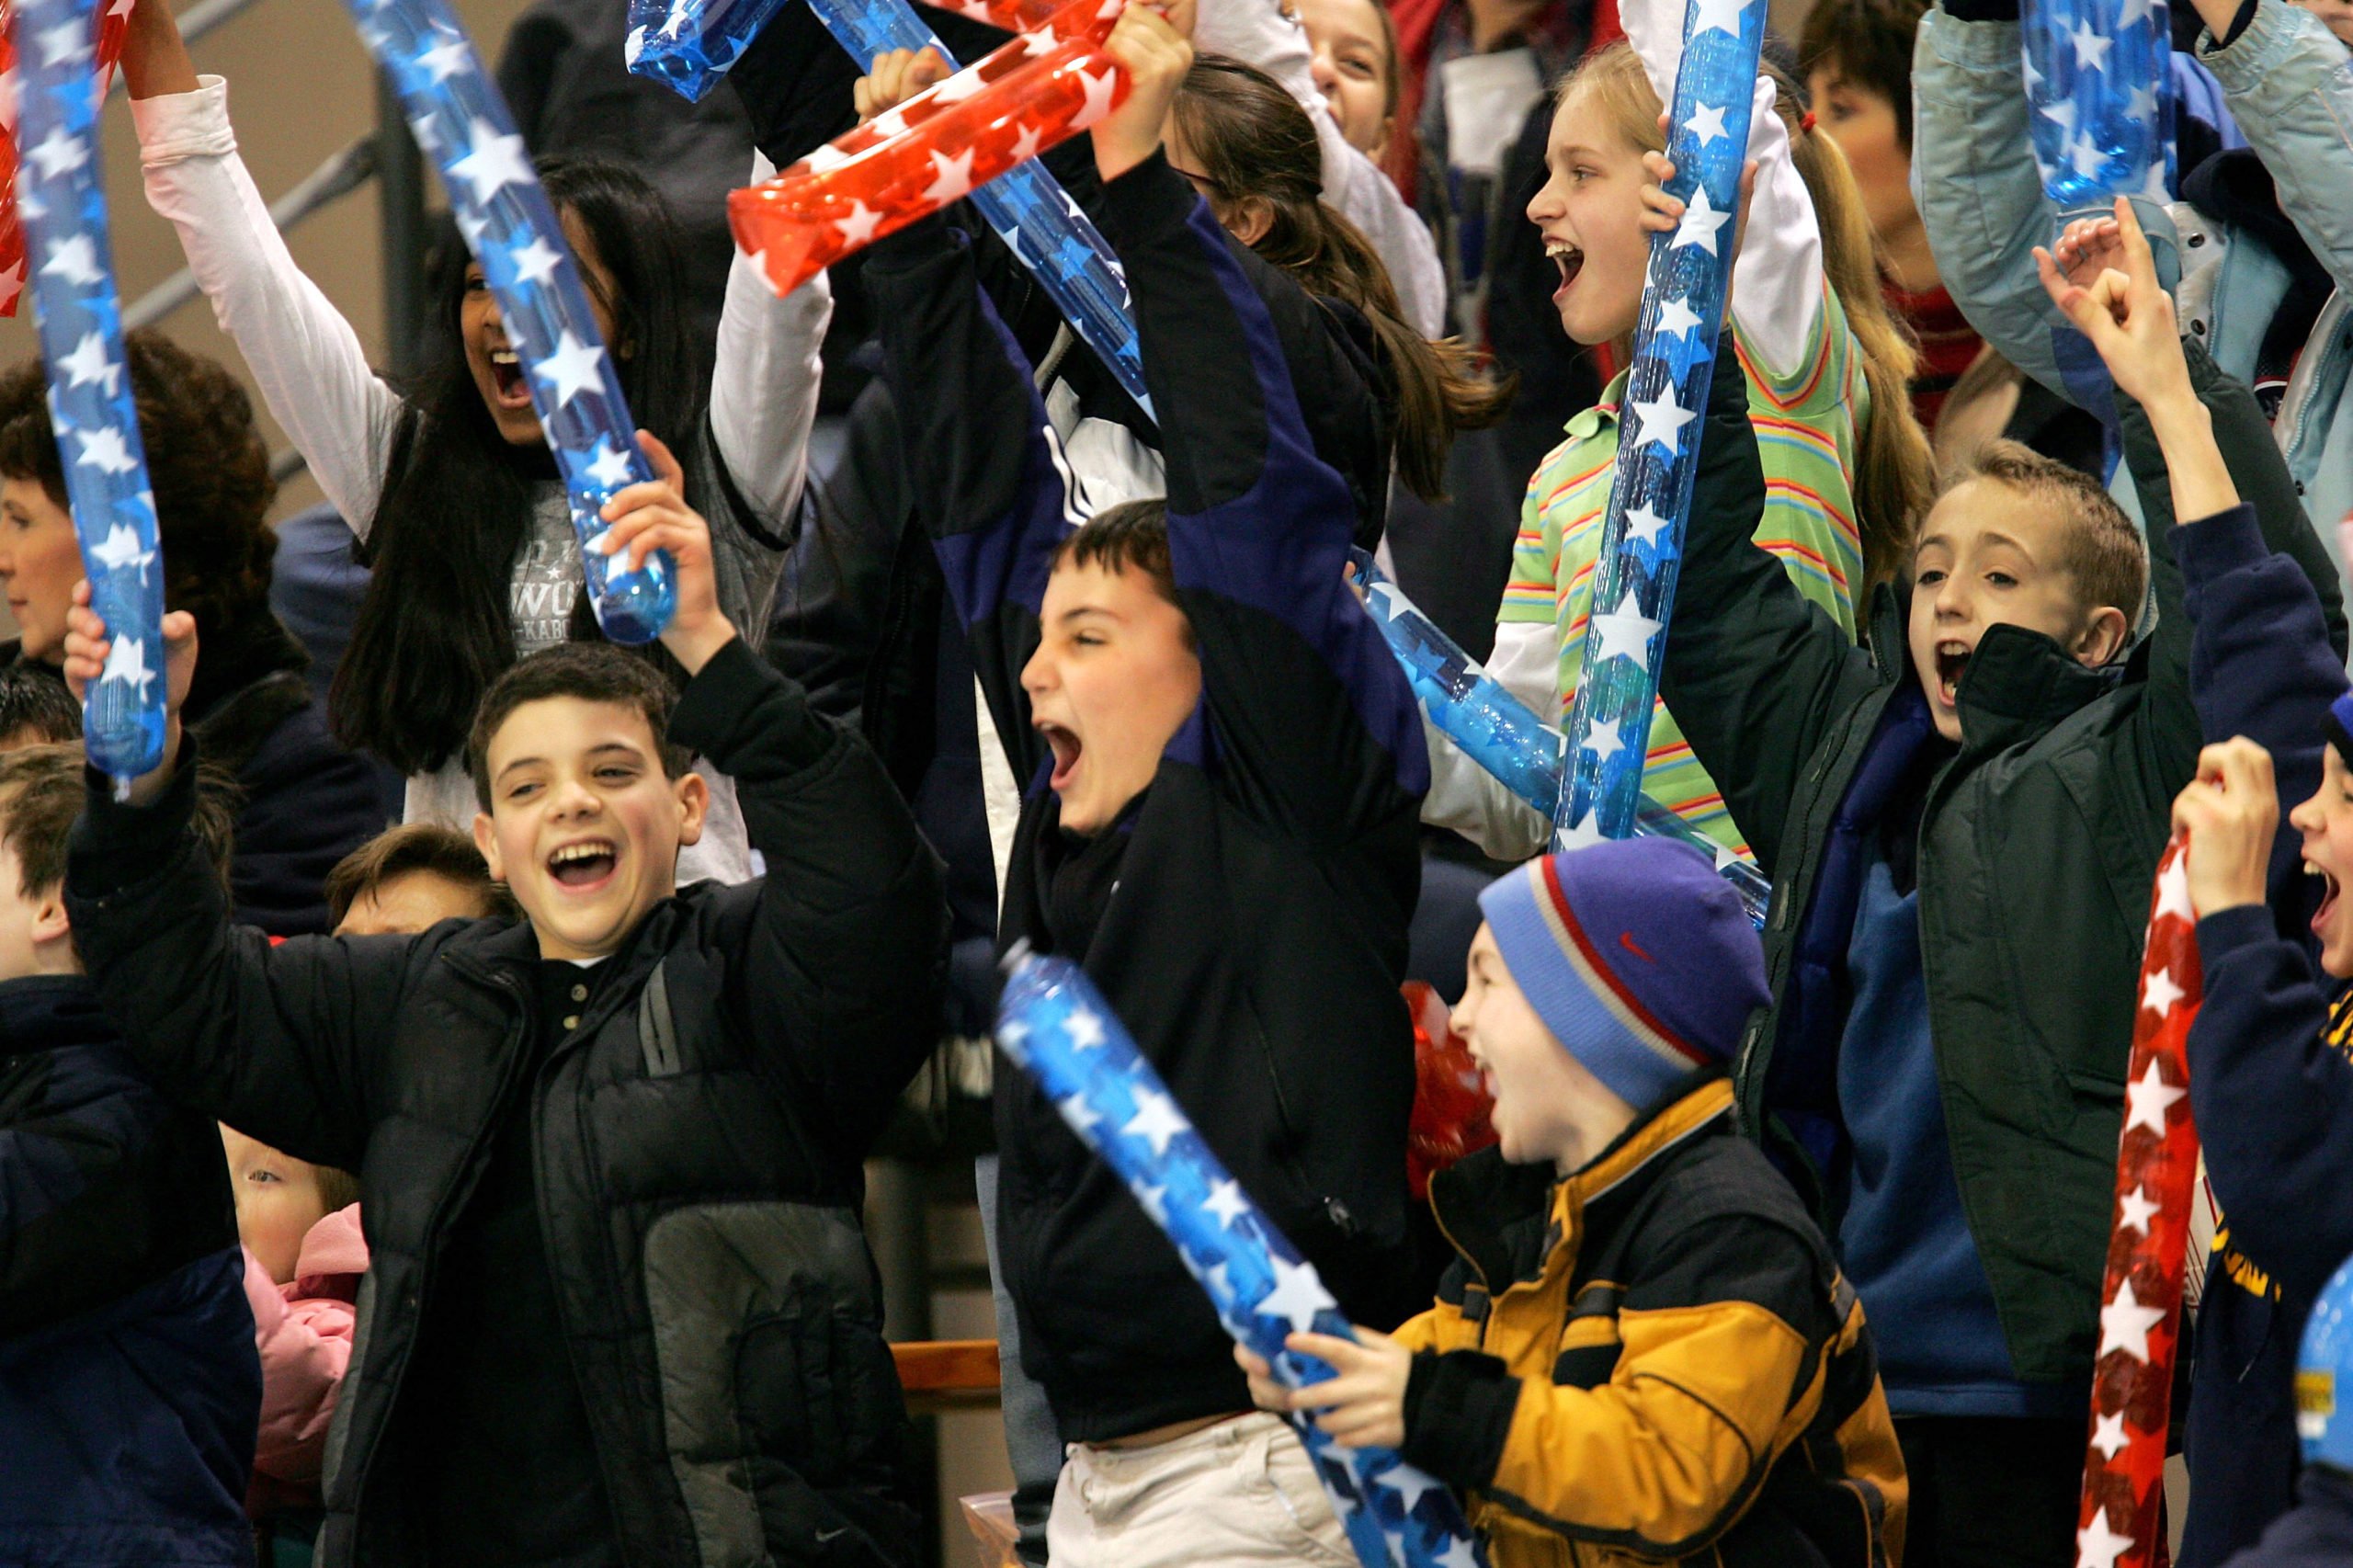 Elementary school kids cheer during the US Nationals Short Track Speed Skating Championships on February 24, 2005 at the Pettit National Ice Center in Milwaukee, Wisconsin. (Photo By Jamie Squire/Getty Images)